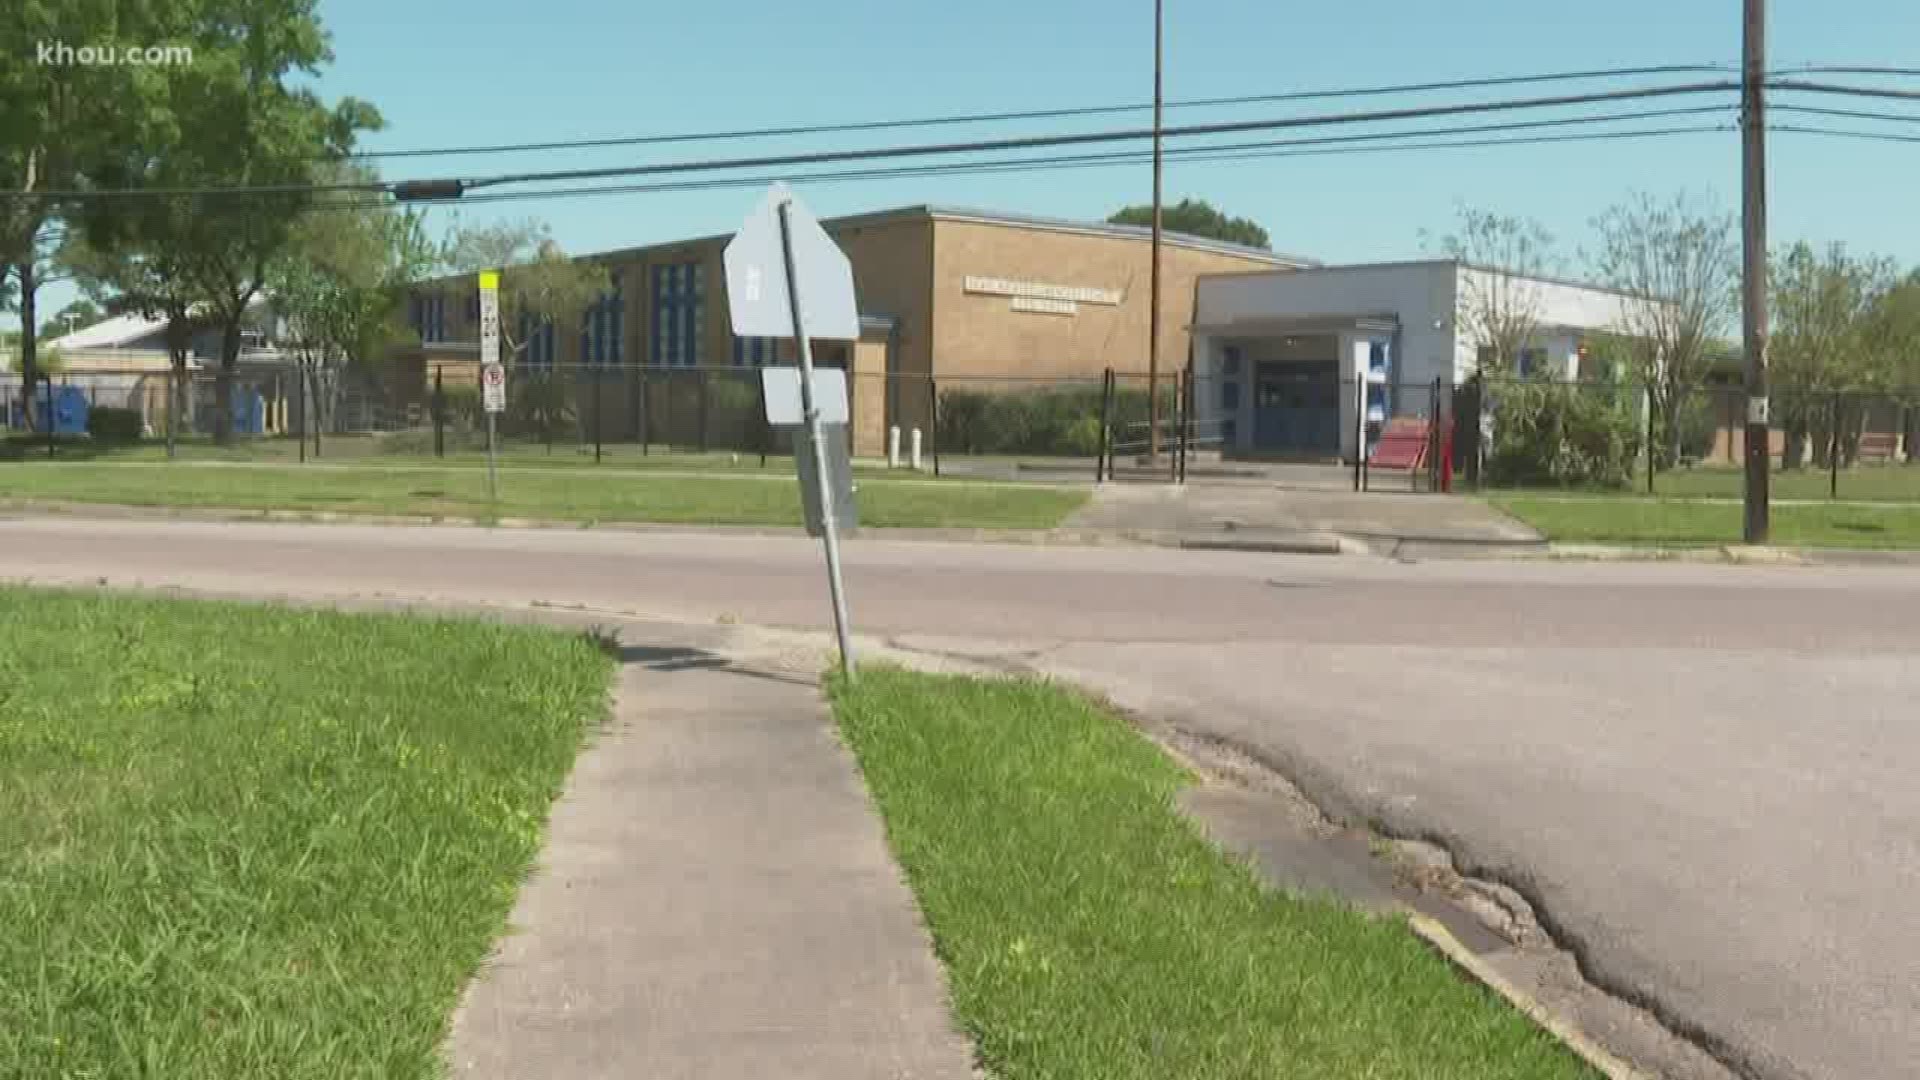 The ITC fire and benzene scare had parents and teachers in Houston Independent School District calling for schools to be shut down while crews got control of the situation. Some nearby districts did cancel classes, but HISD did not.